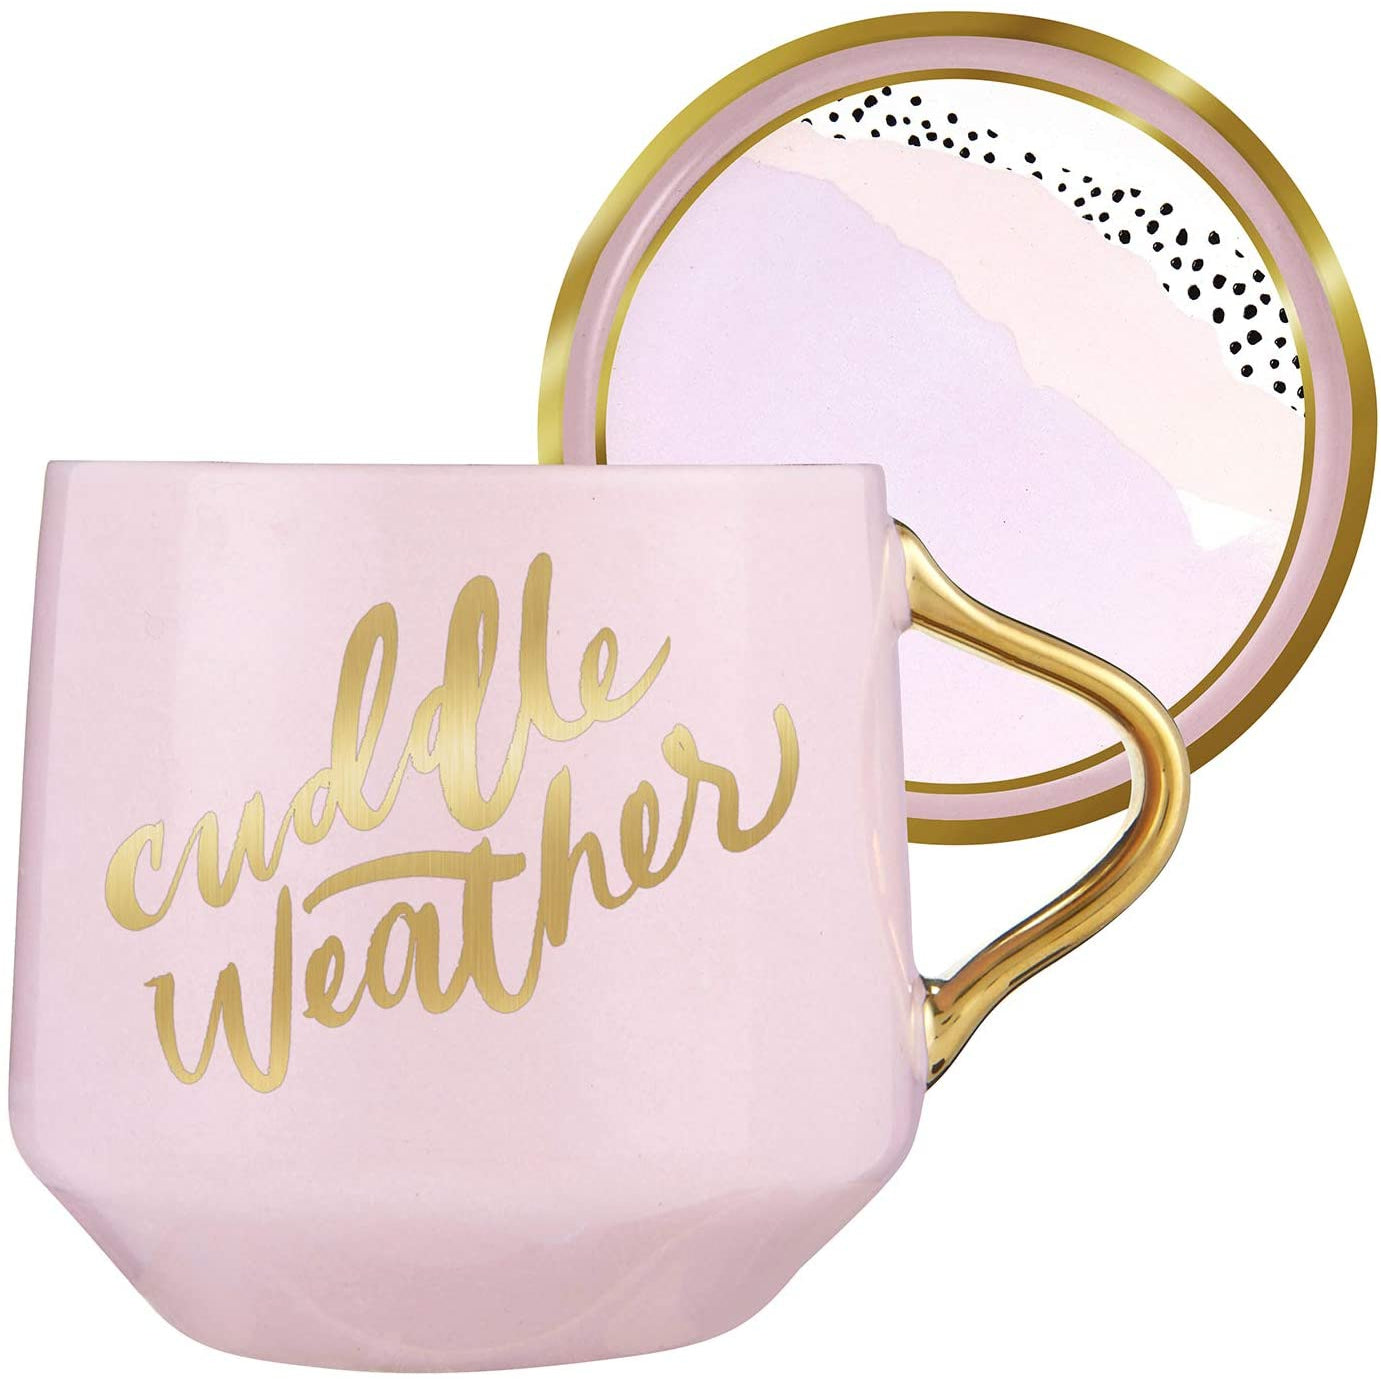 Cuddle Weather Mug & Coaster Lid in Pink and Gold